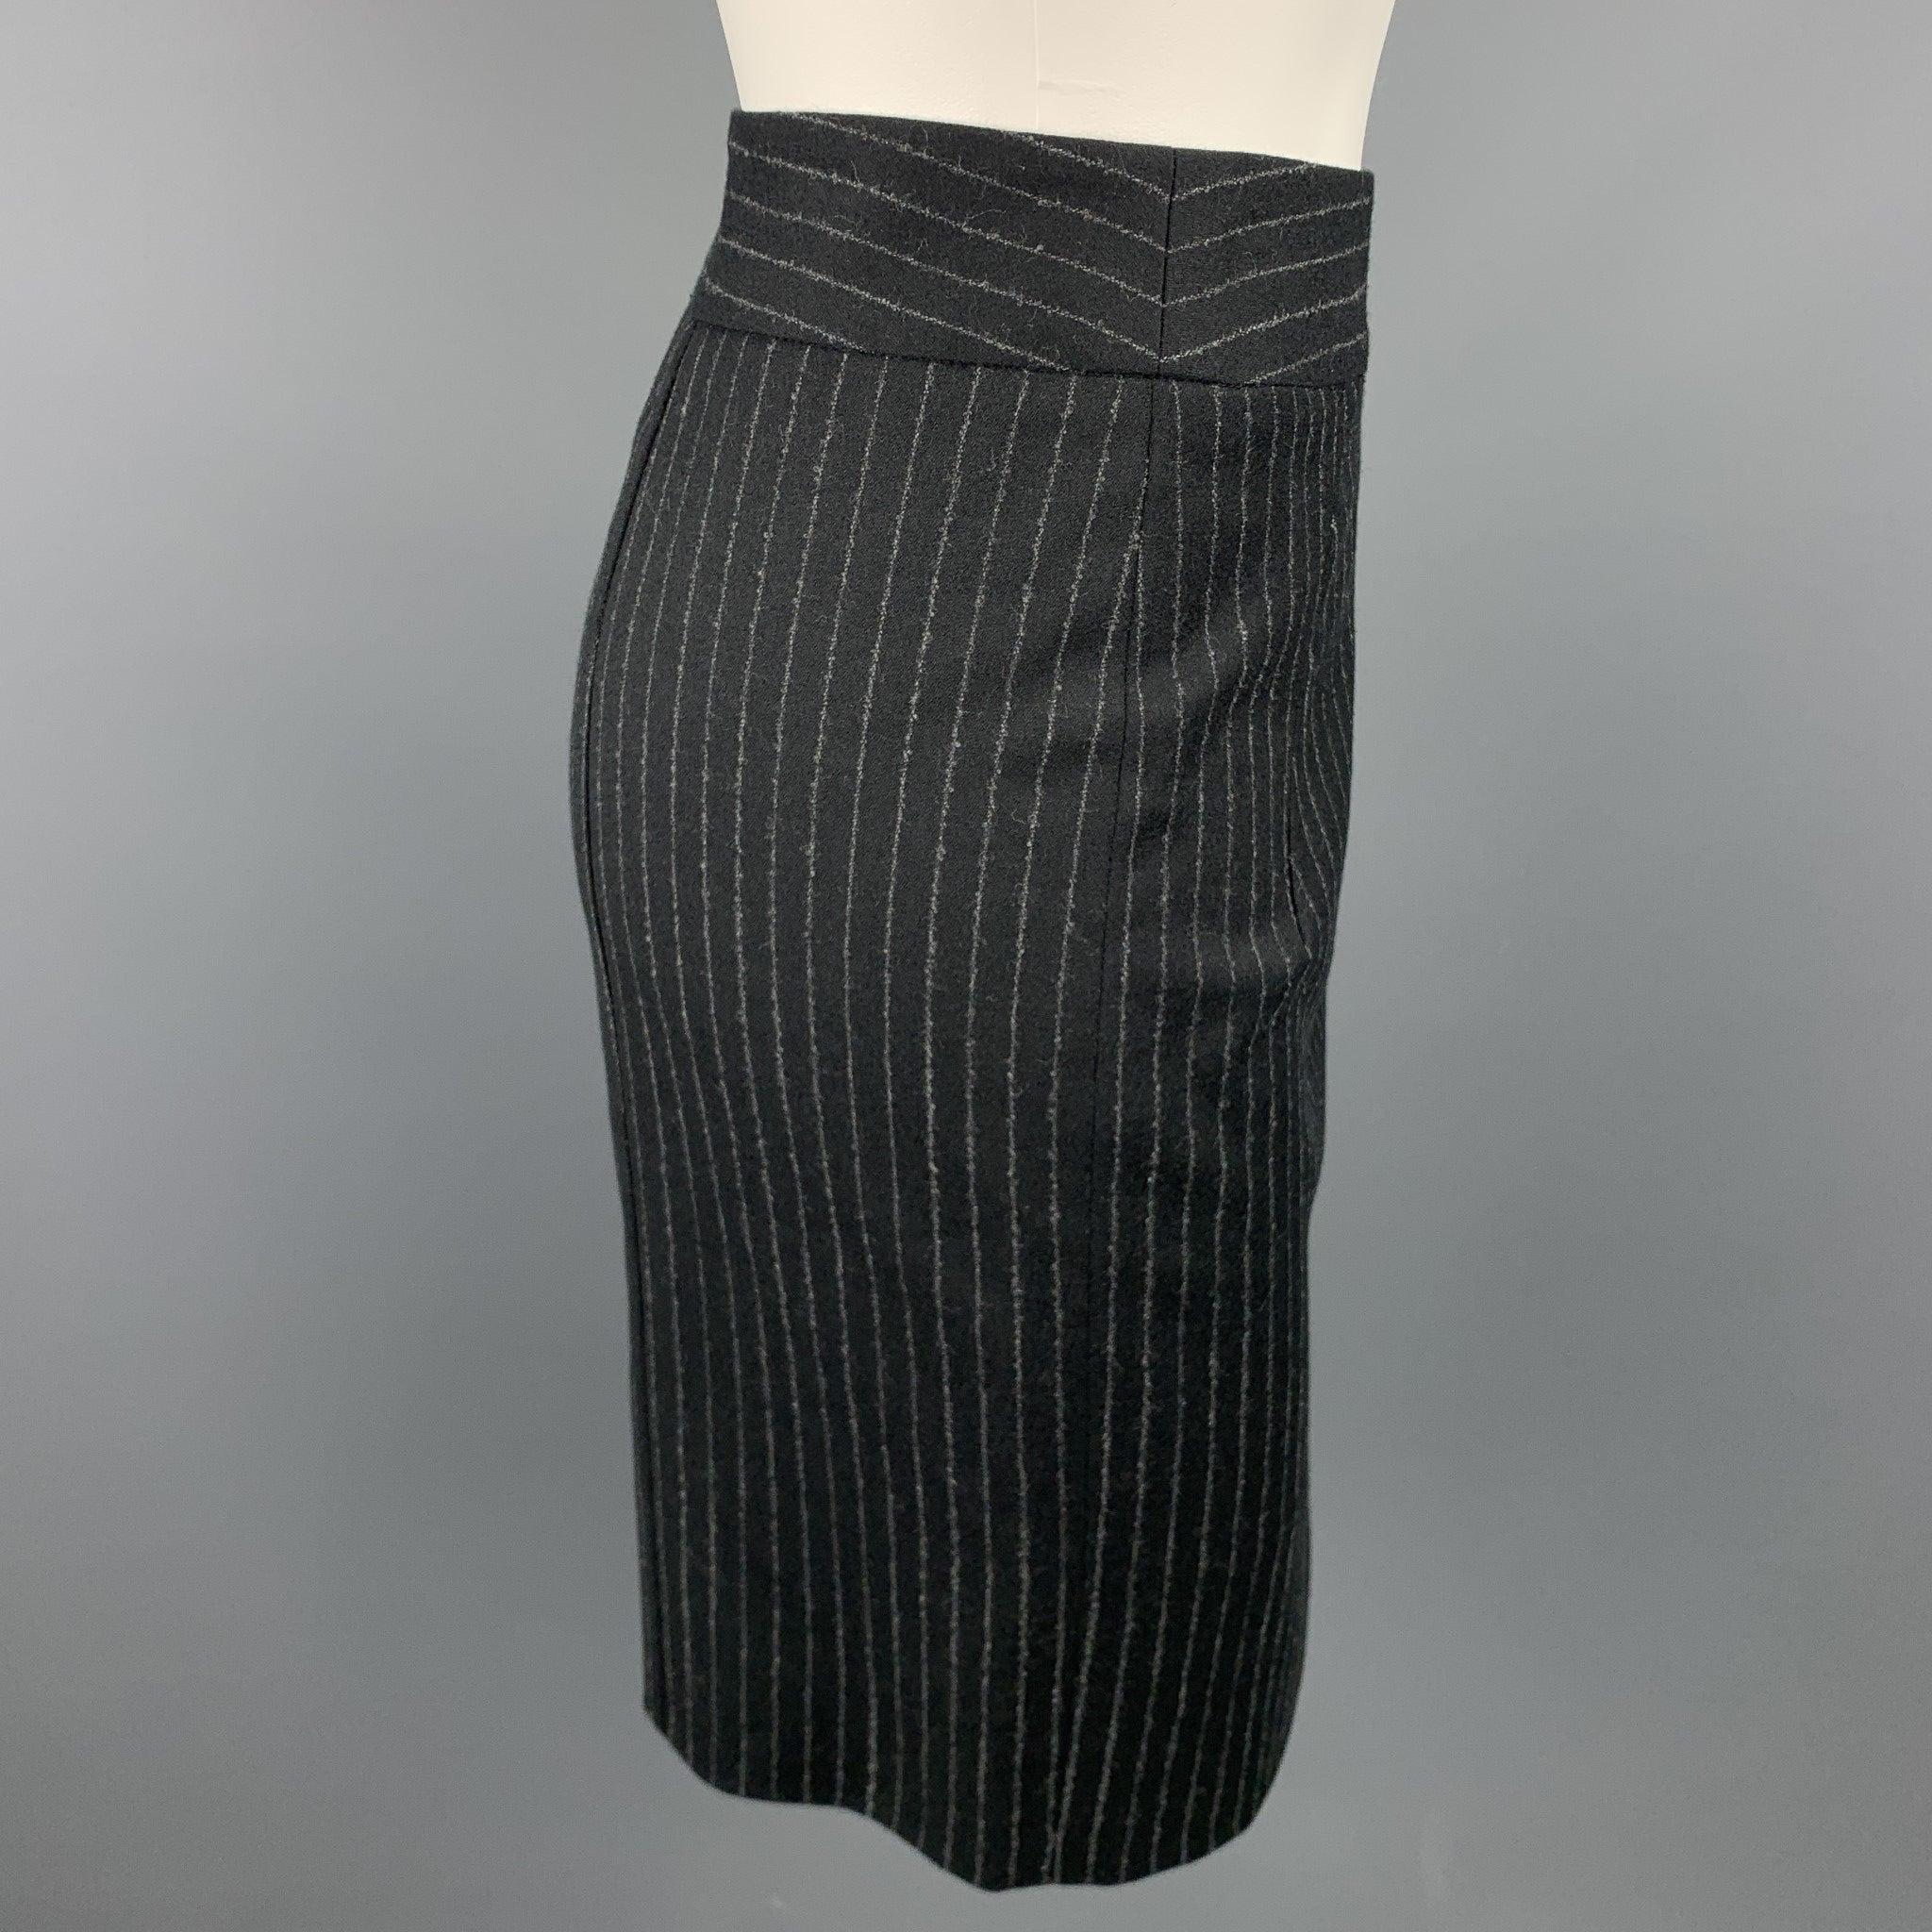 GIORGIO ARMANI skirt comes in a black & gray pinstripe with a full slip liner featuring a pencil style, back vent, and back zipper closure.
 Excellent
 Pre-Owned Condition. 
 

 Marked:  Size not visible
  
 

 Measurements: 
  Waist: 28 inches 
